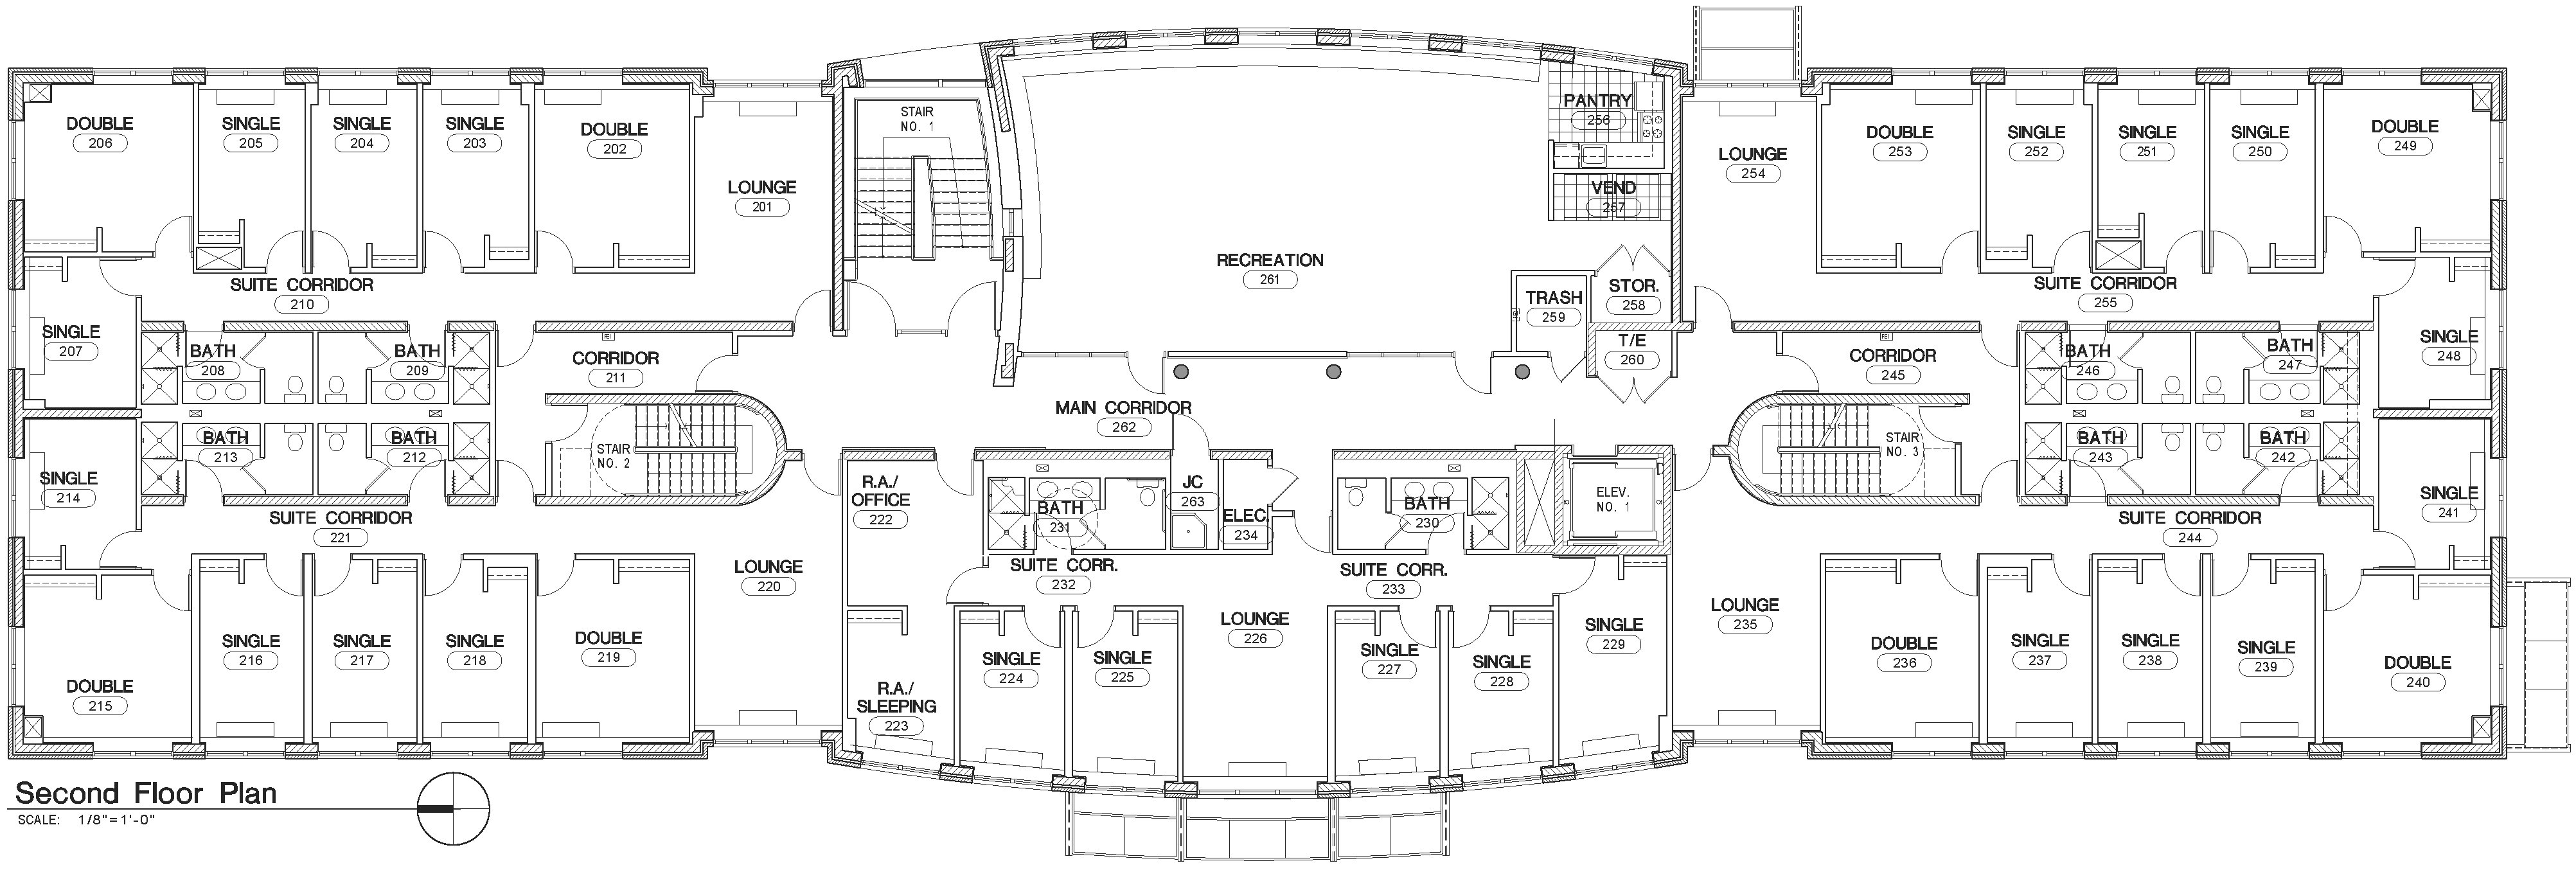 Floor Plans Slivka Residential College of Science and